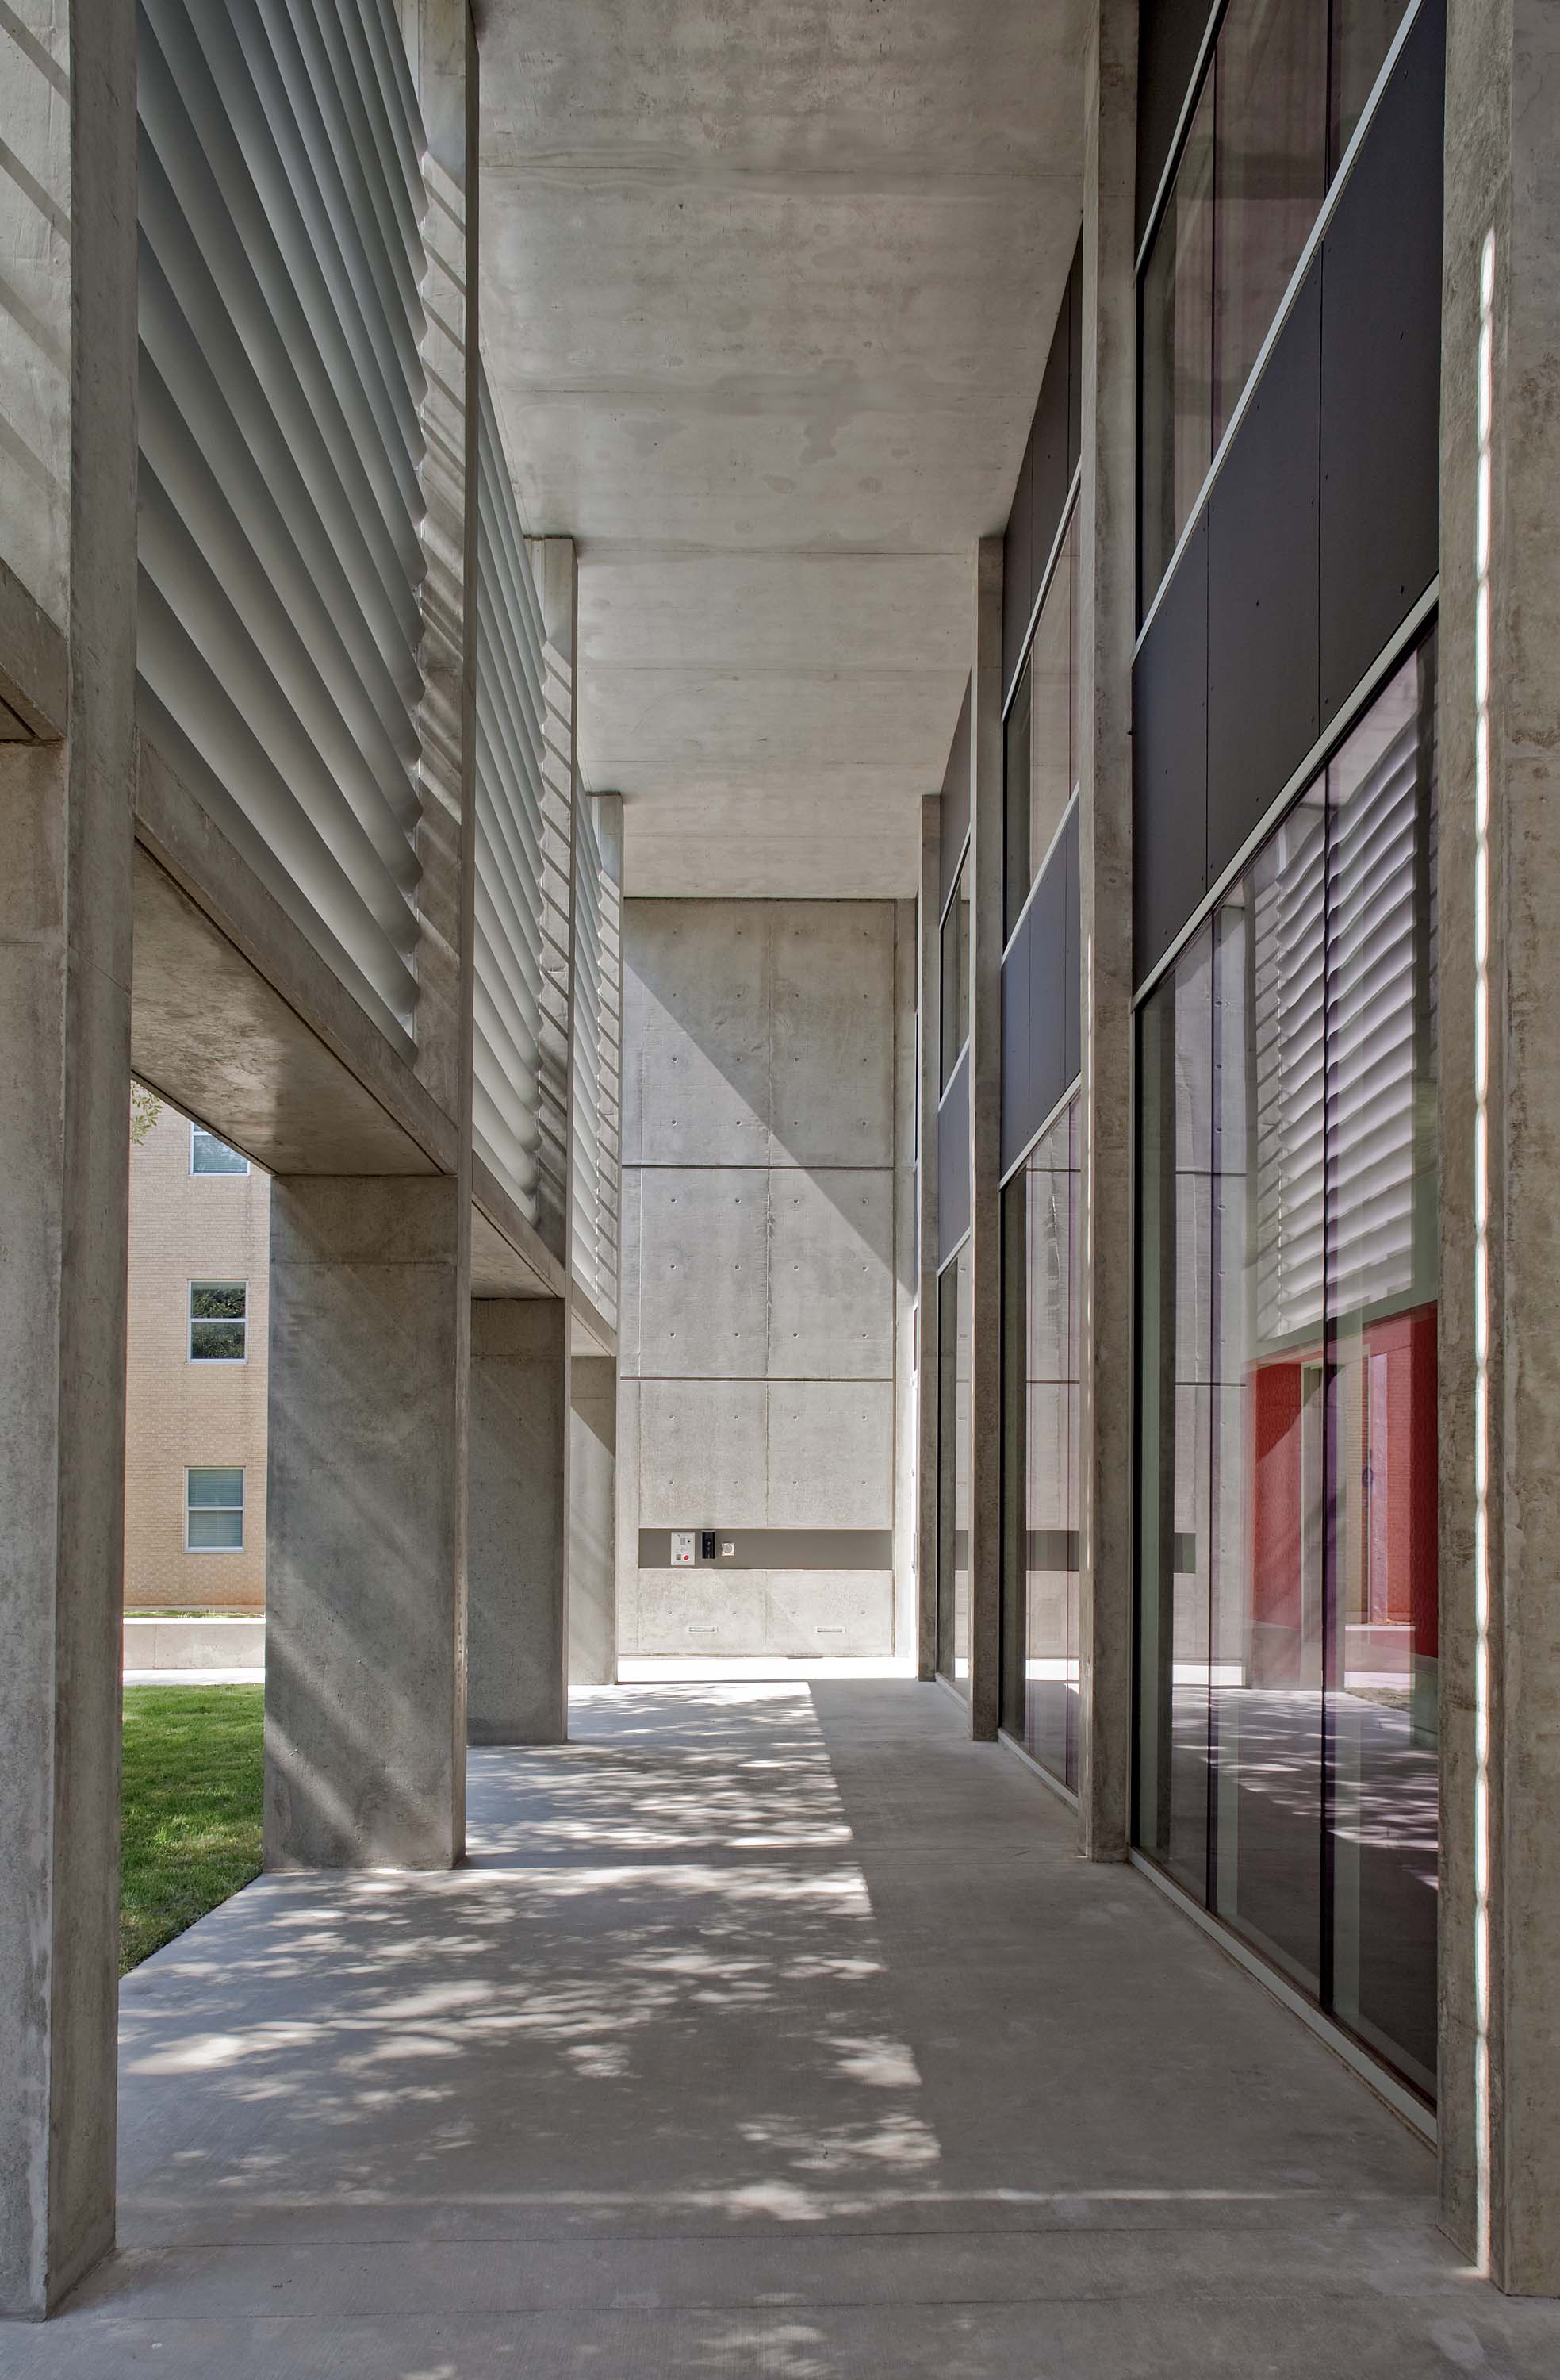 Exterior covered walkway of Doyle Hall by Specht Novak Architects. Shot by Taggart Sorensen.